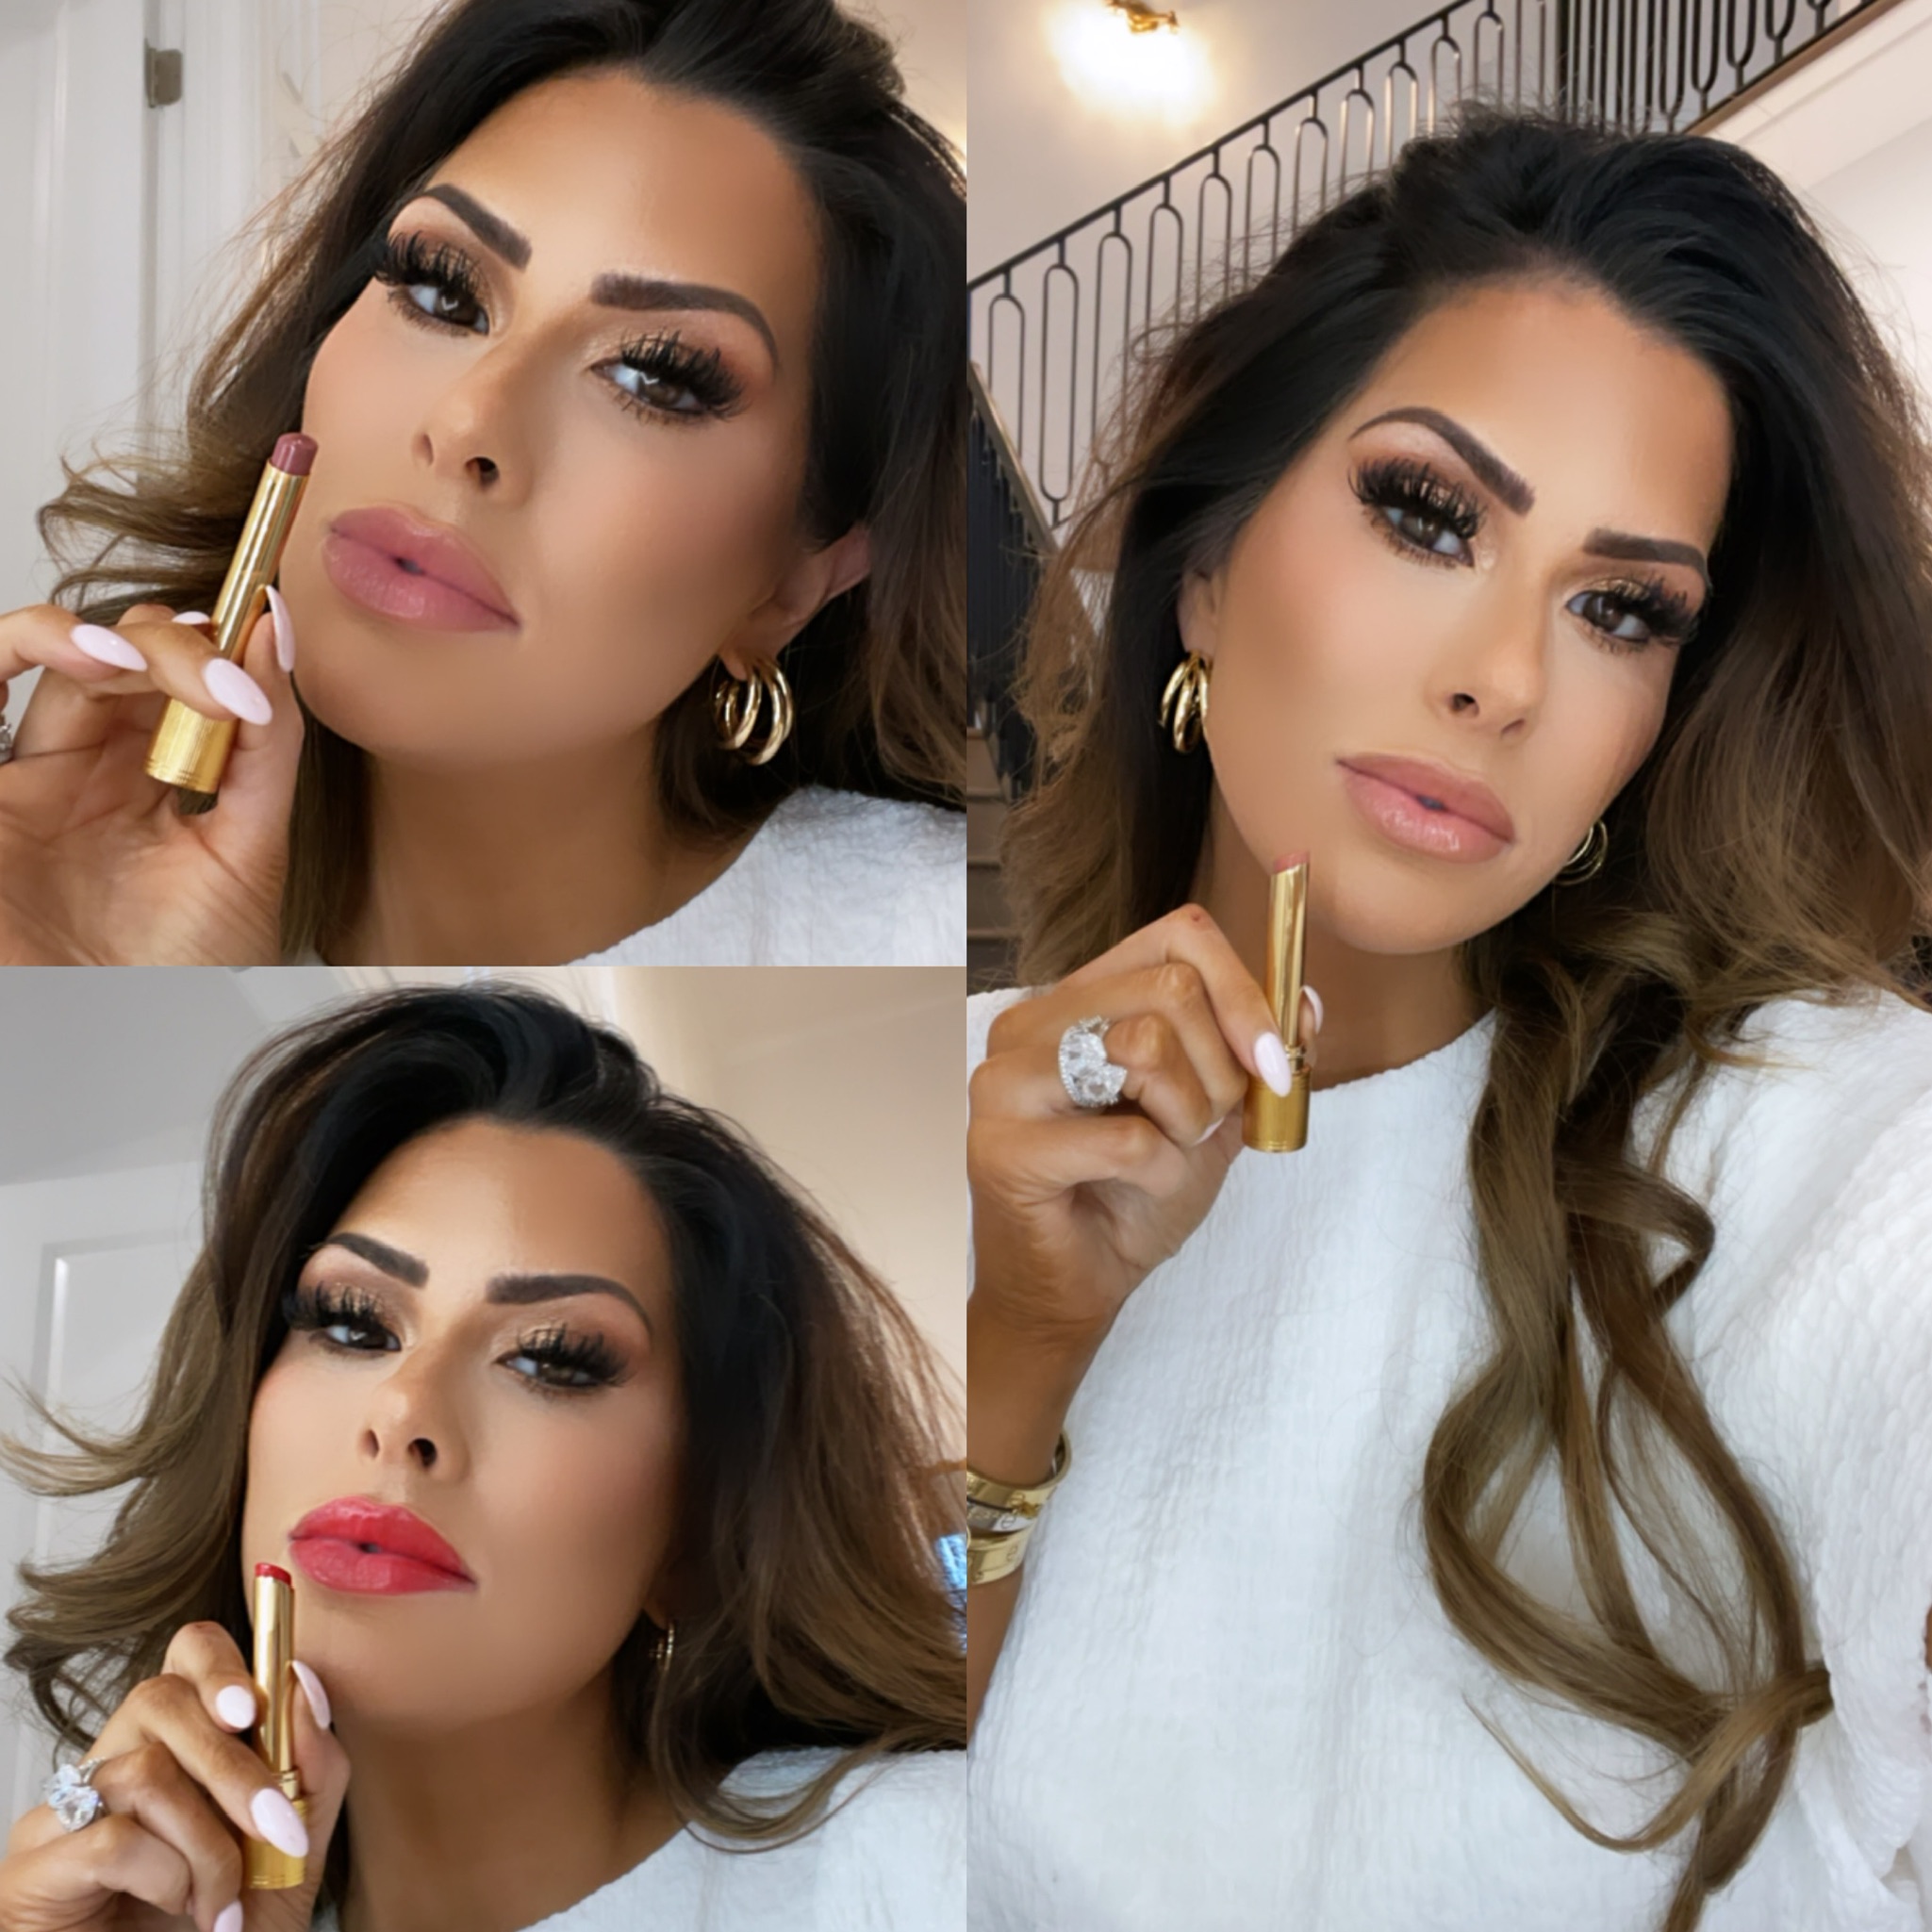 gucci beauty, makeup review, gucci glow lip, best summer lipsticks, Emily Ann gemma makeup routine, gucci lipstick | Instagram Recap by popular US life and style blog, The Sweetest Thing: image of Emily Gemma wearing a white top, gold hoop earrings and holding Gucci lipstick. 